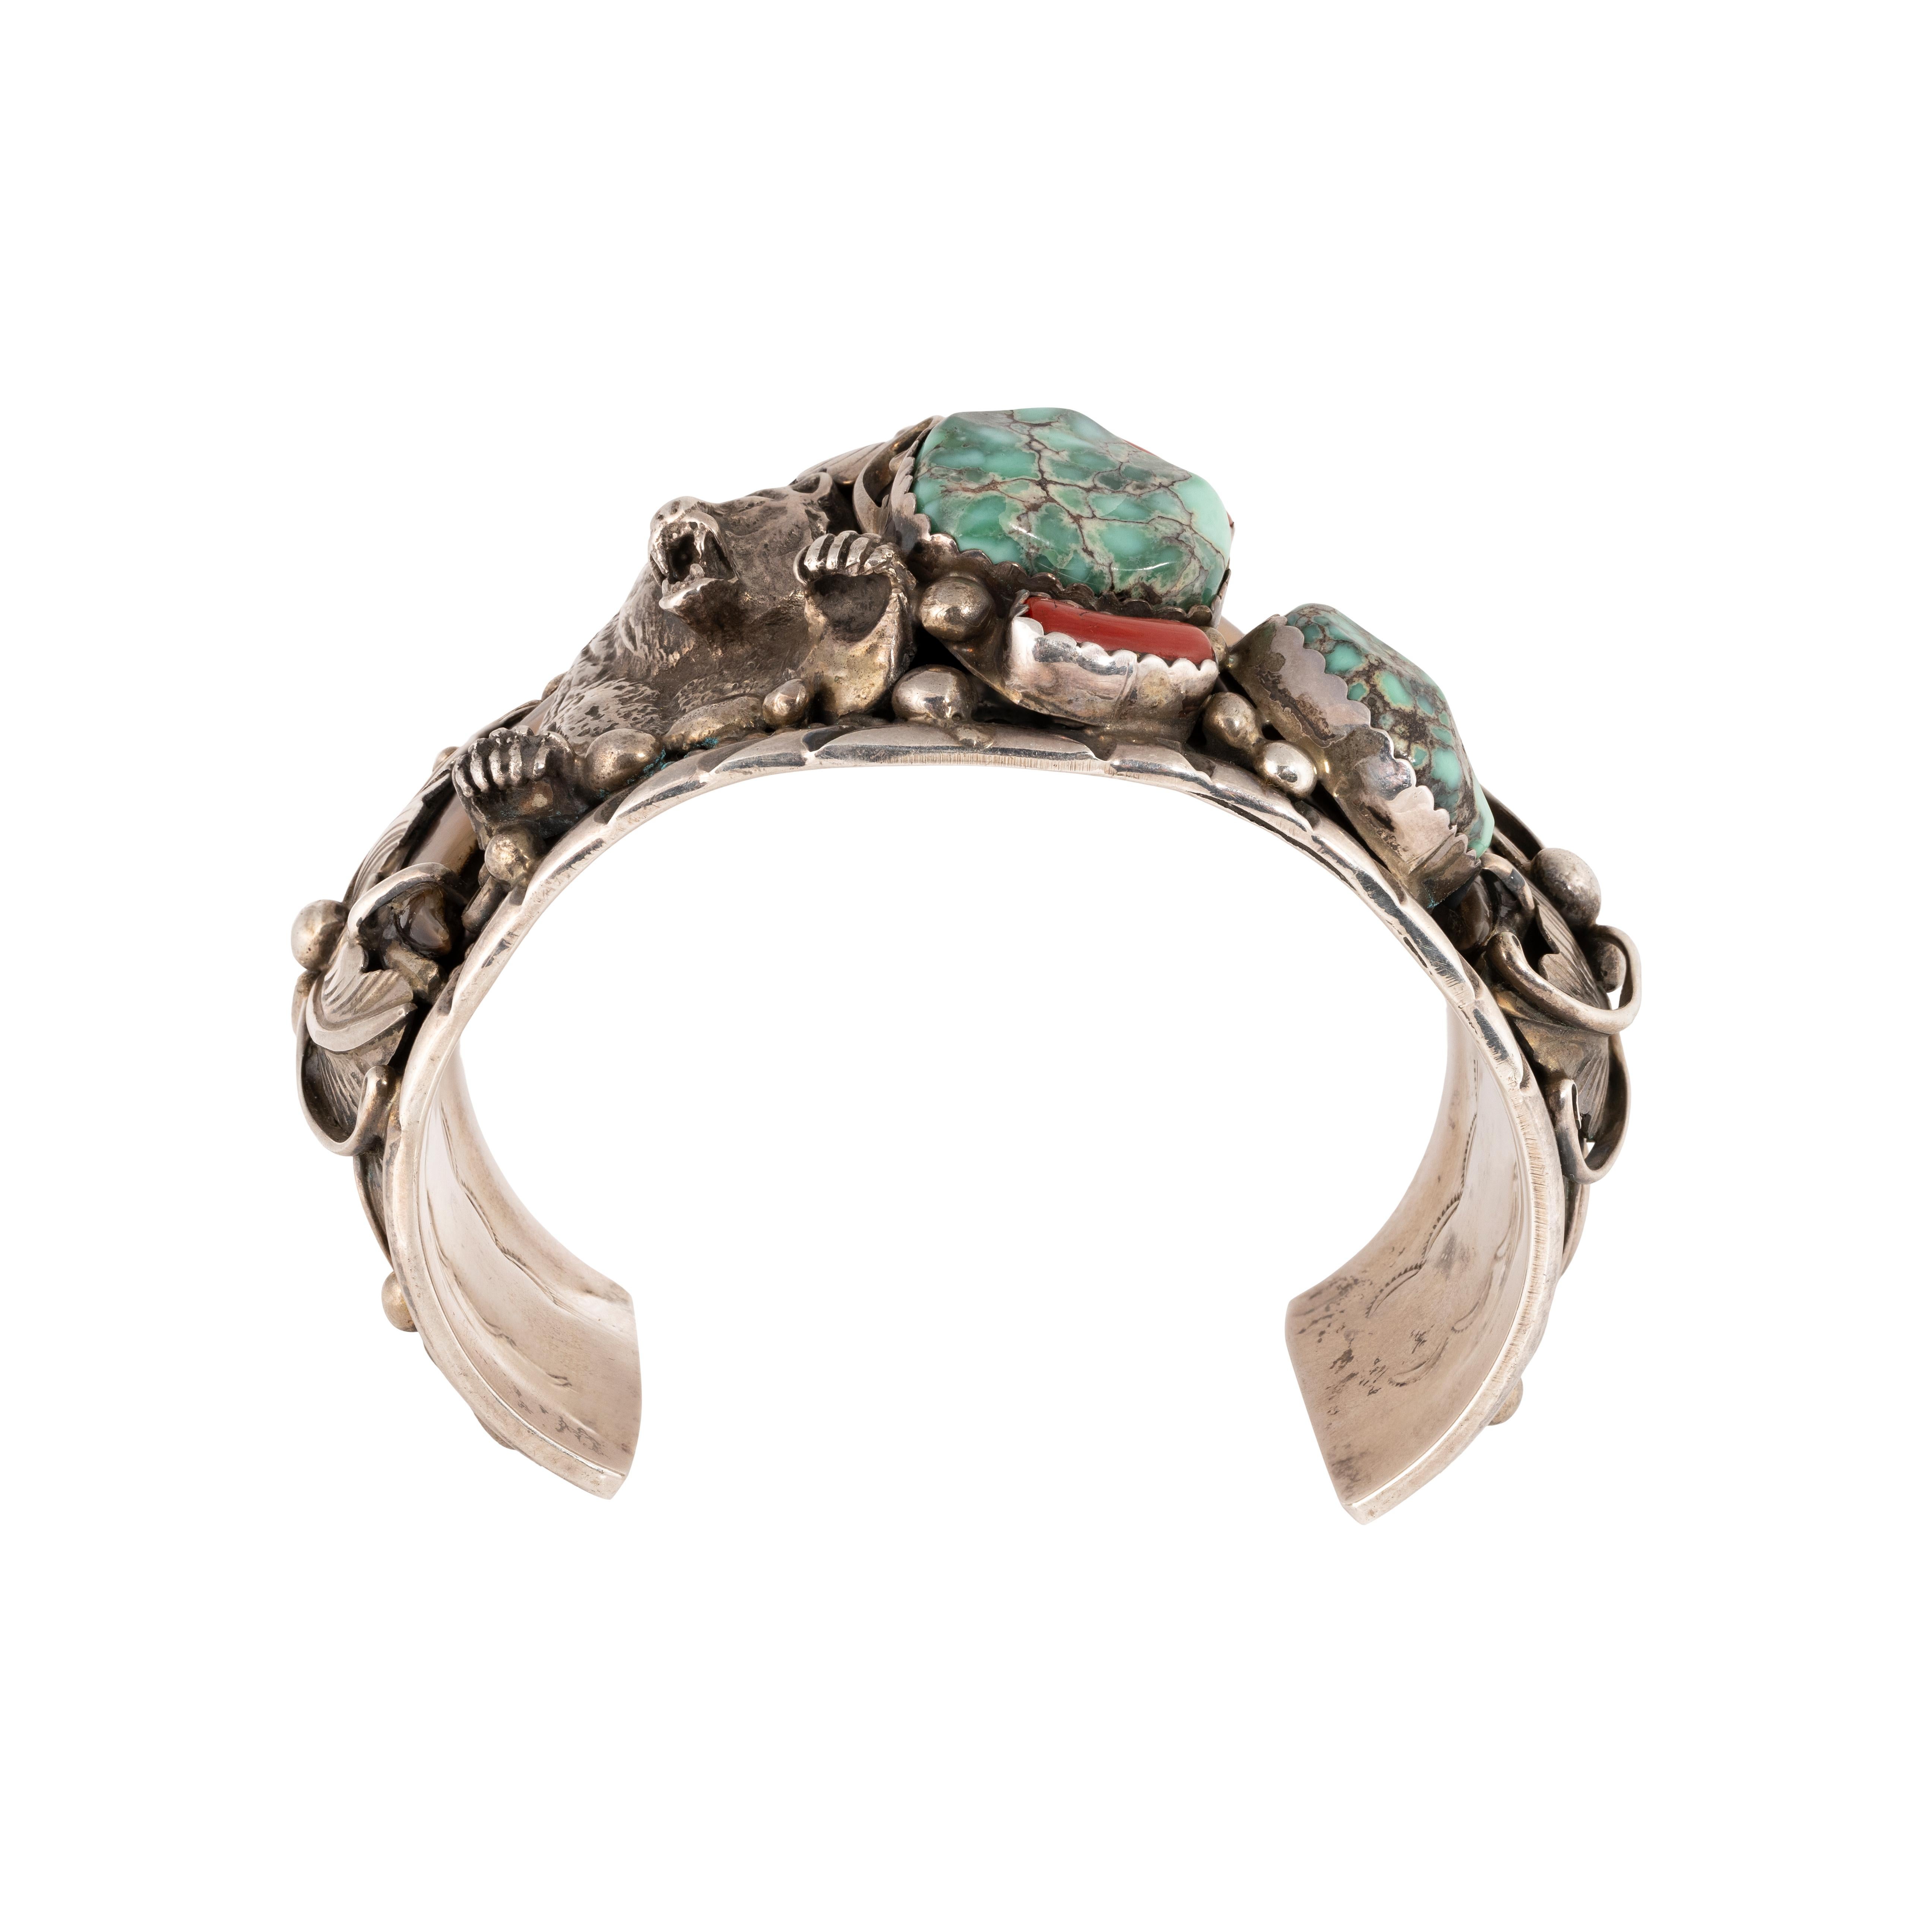 Navajo Carrio Lake turquoise, coral cuff by Norm Thompson. Stamped 